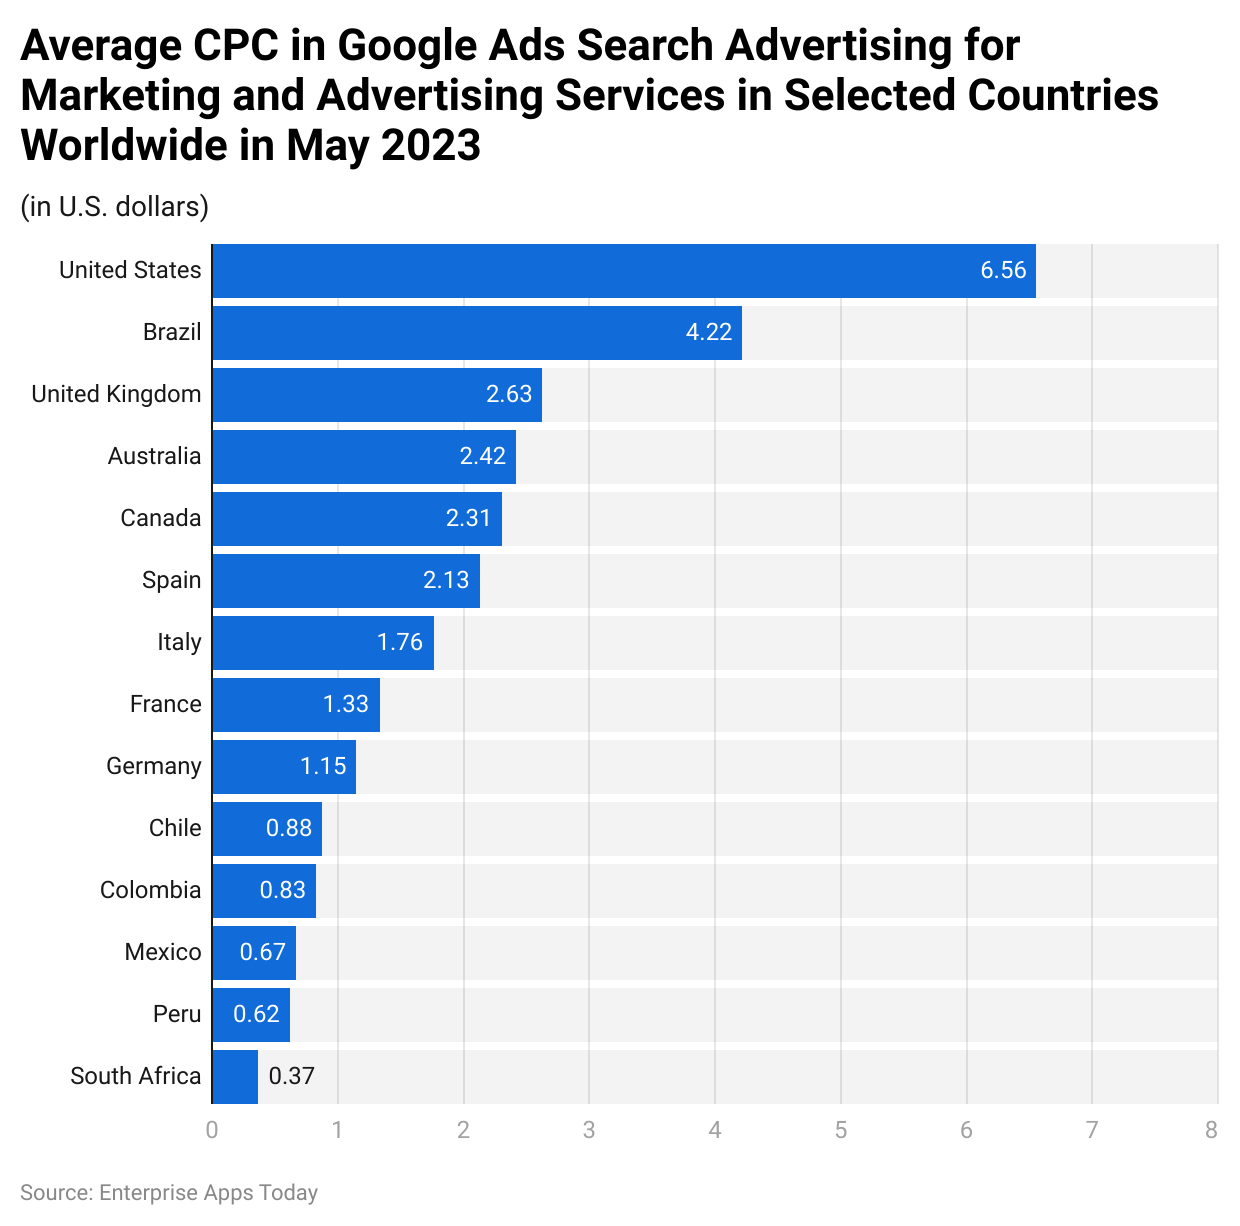 Average cost-per-click (CPC) in Google Ads search advertising for marketing and advertising services in selected countries worldwide in May 2023